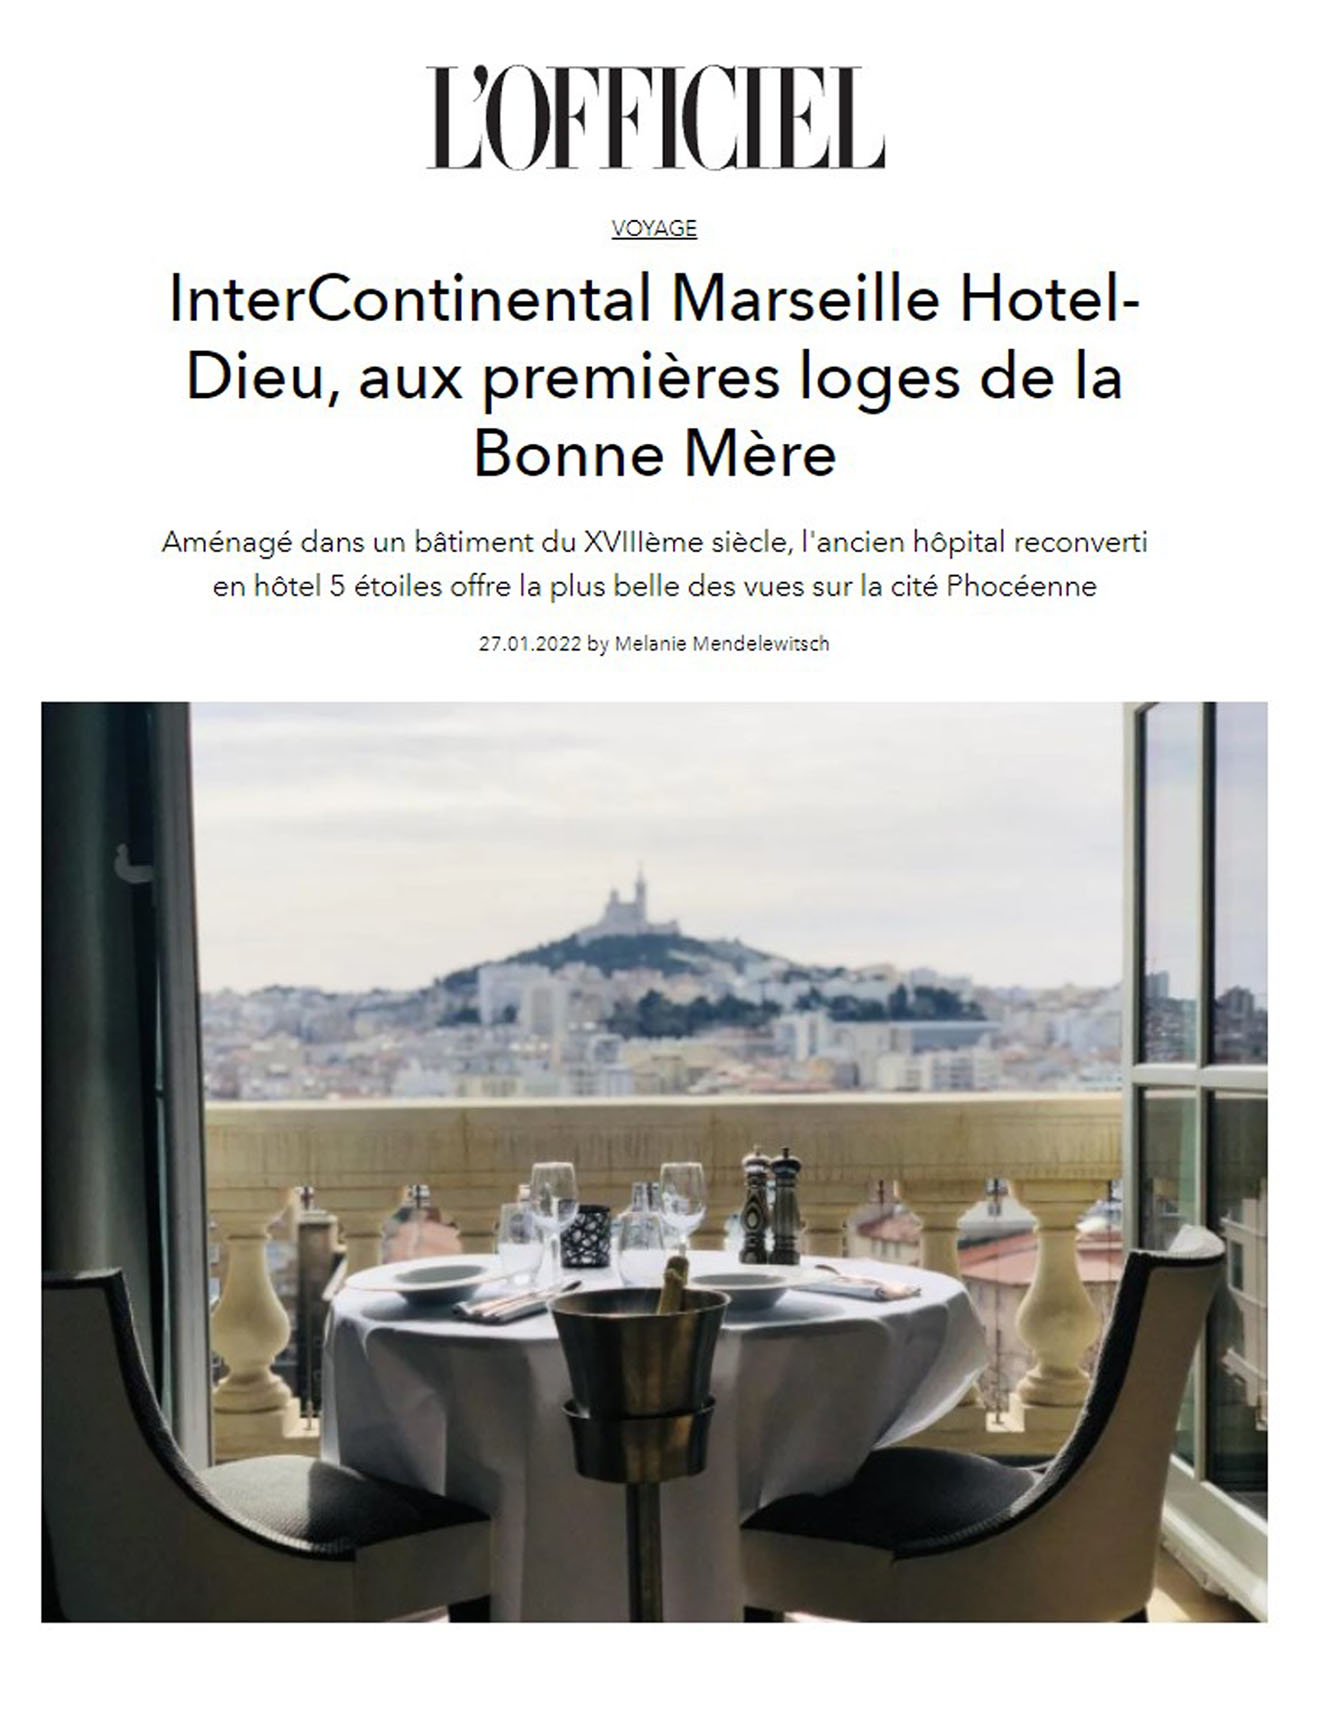 Article from L'officiel about the InterContinental Marseille Hôtel Dieu, a former hospital transformed into a 5-star hotel designed by Jean-Philippe Nuel